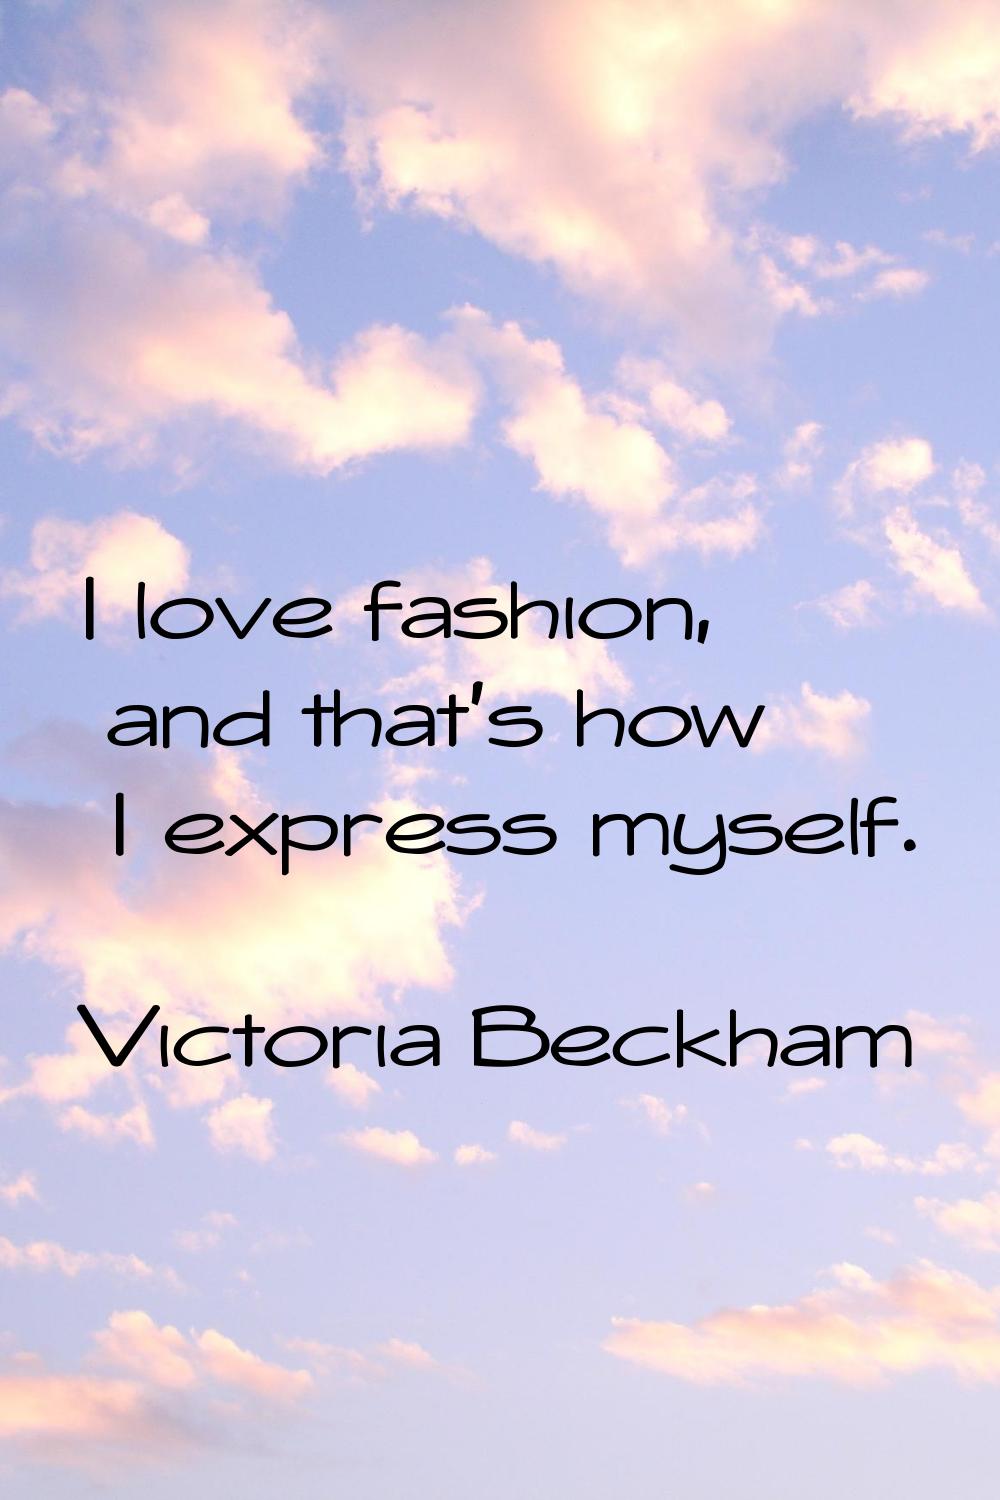 I love fashion, and that's how I express myself.